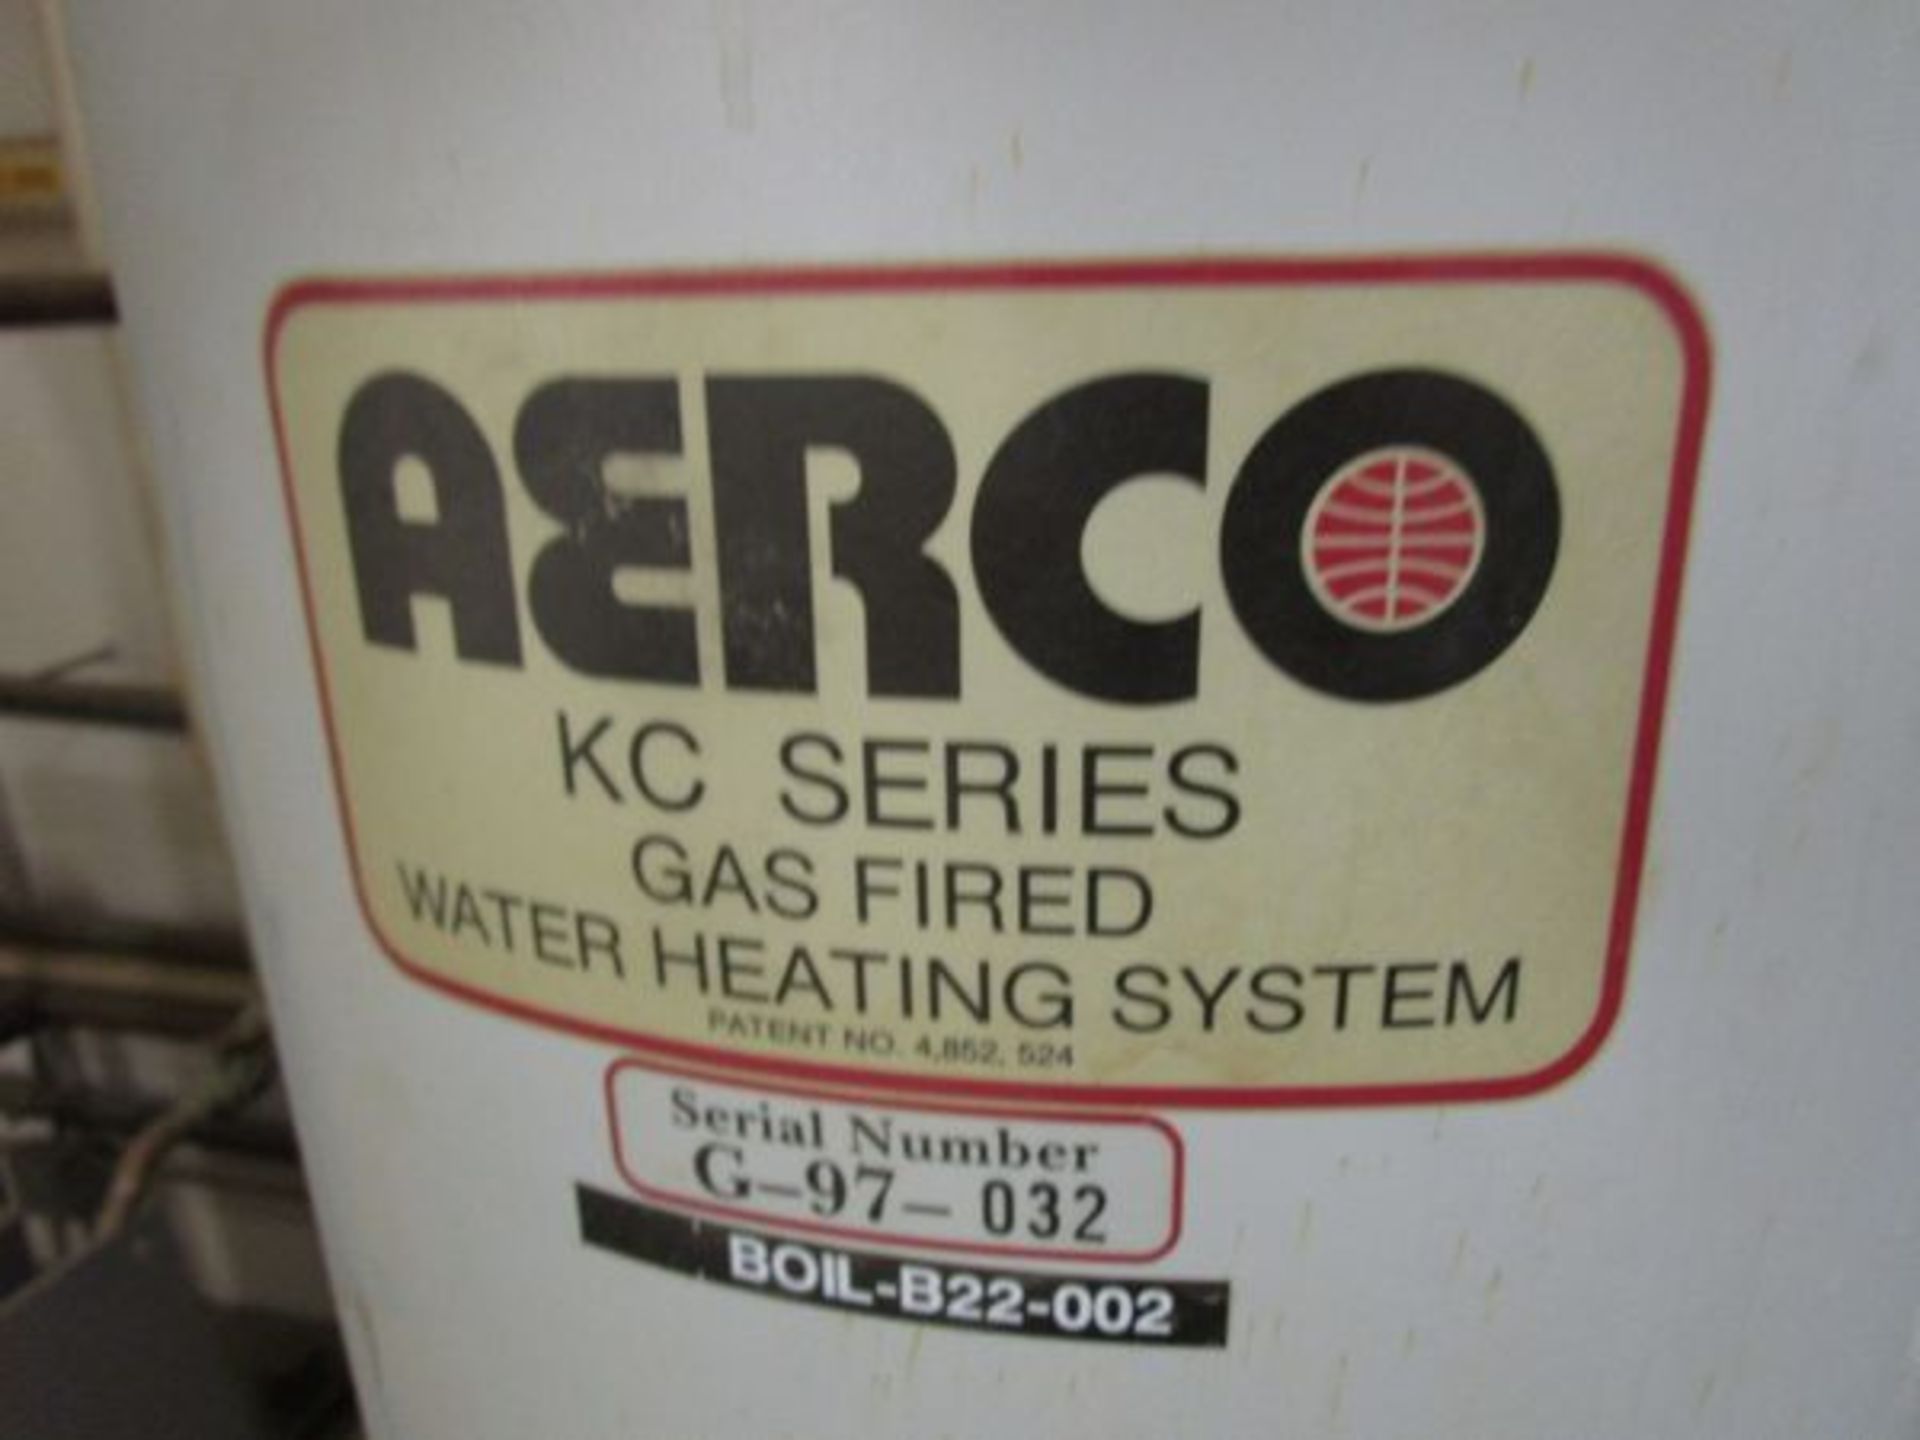 Aerco Model KC Series  Hot Water Boiler , Serial Number: G-97-032  (1997)Gas Fired Water Heater, - Image 5 of 6